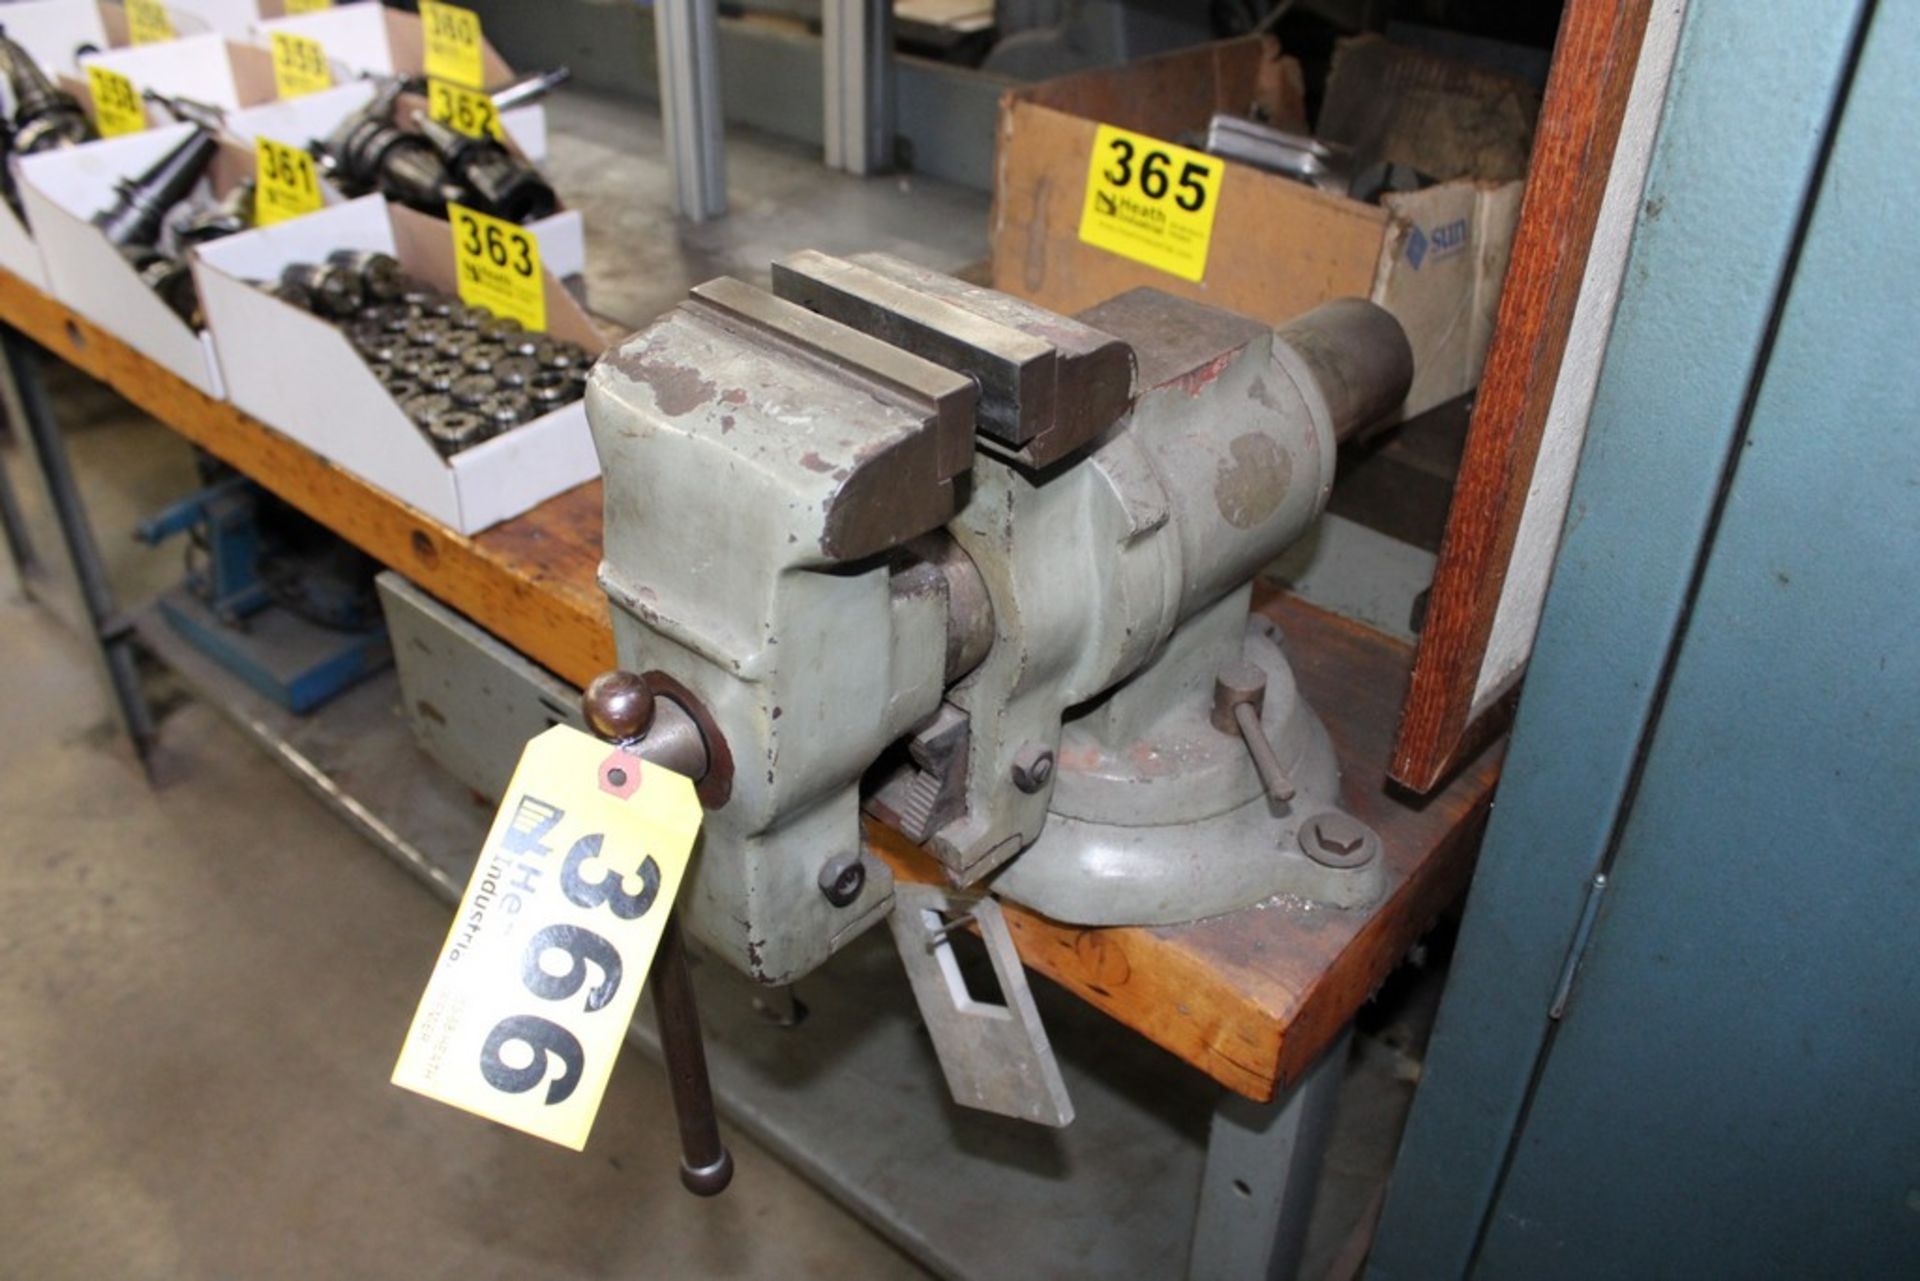 5" SWIVEL BASE VISE WITH MAPLE TP WORK BENCH, 72" X 29" X 35" - Image 2 of 2